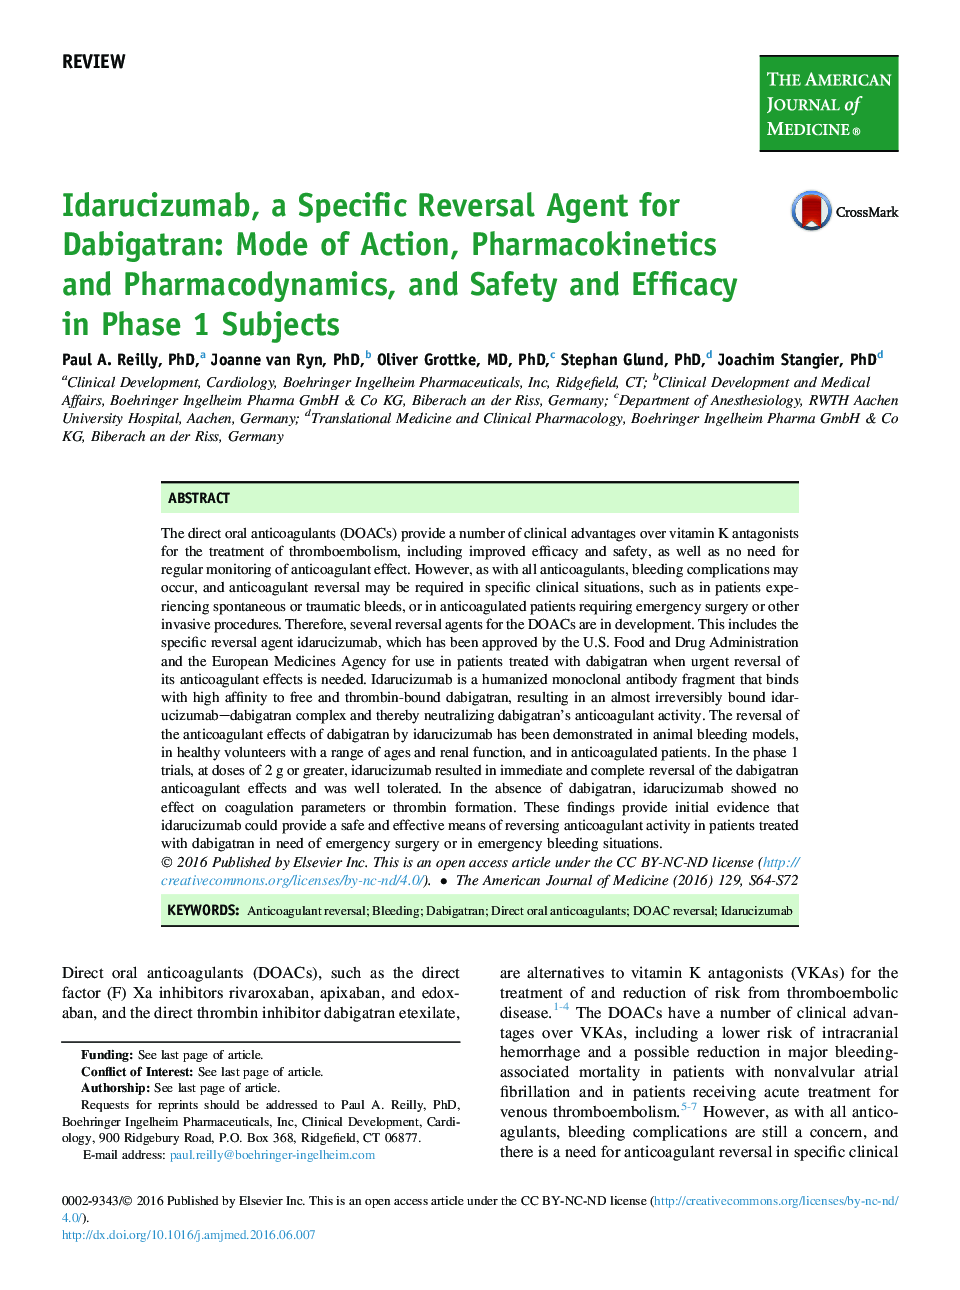 Idarucizumab, a Specific Reversal Agent for Dabigatran: Mode of Action, Pharmacokinetics and Pharmacodynamics, and Safety and Efficacy in Phase 1 Subjects